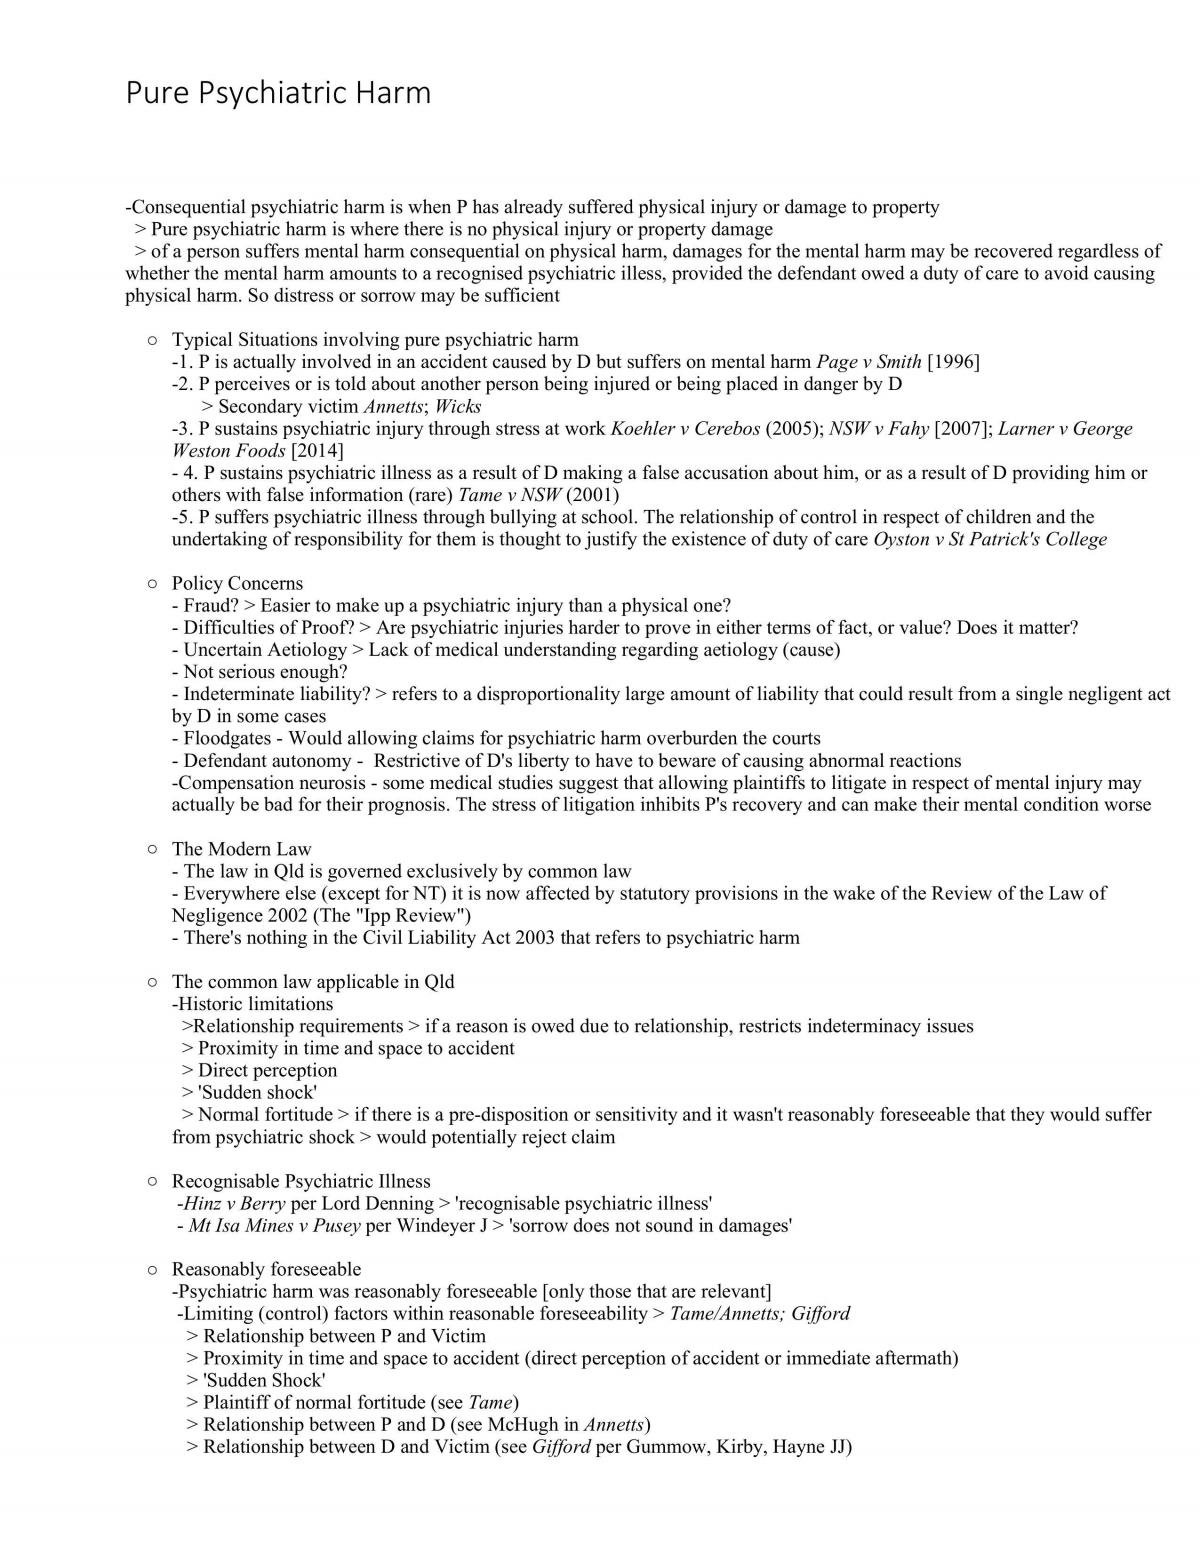 LAWS1113 Semester Summary Notes - Page 1